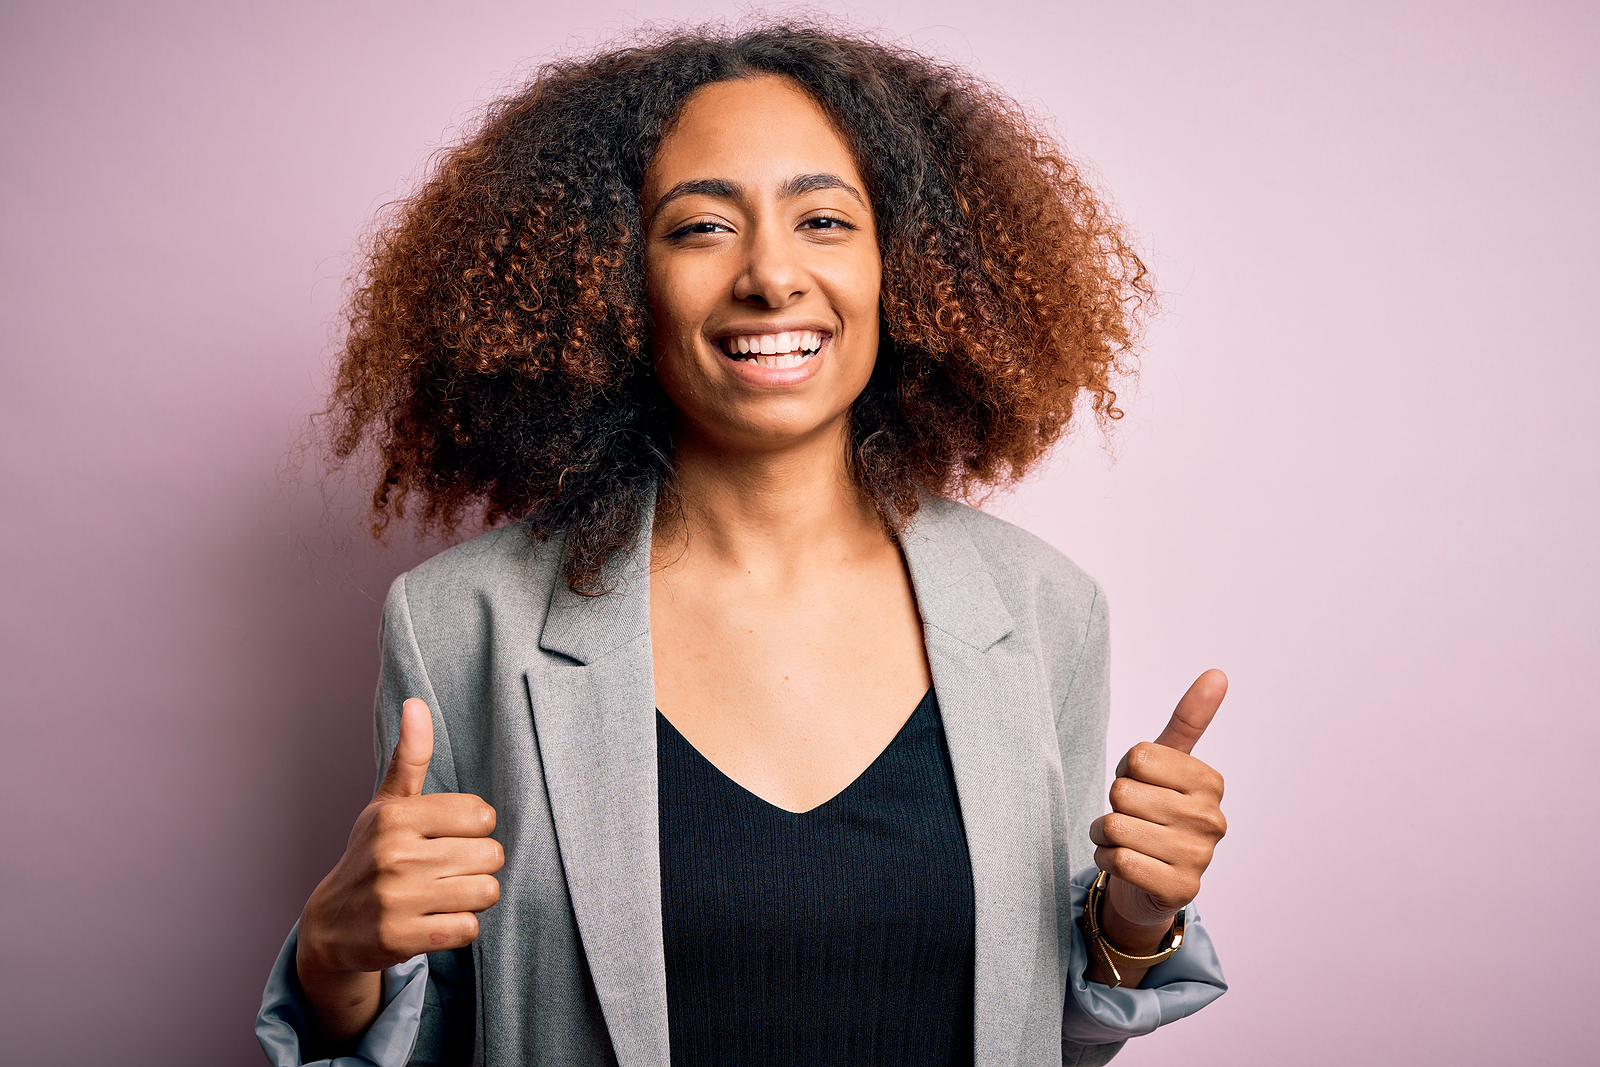 A Image of a multi ethnic attractive young woman with puffy hair and a blazer has her thumbs up in the air and smiling against a lavender background.